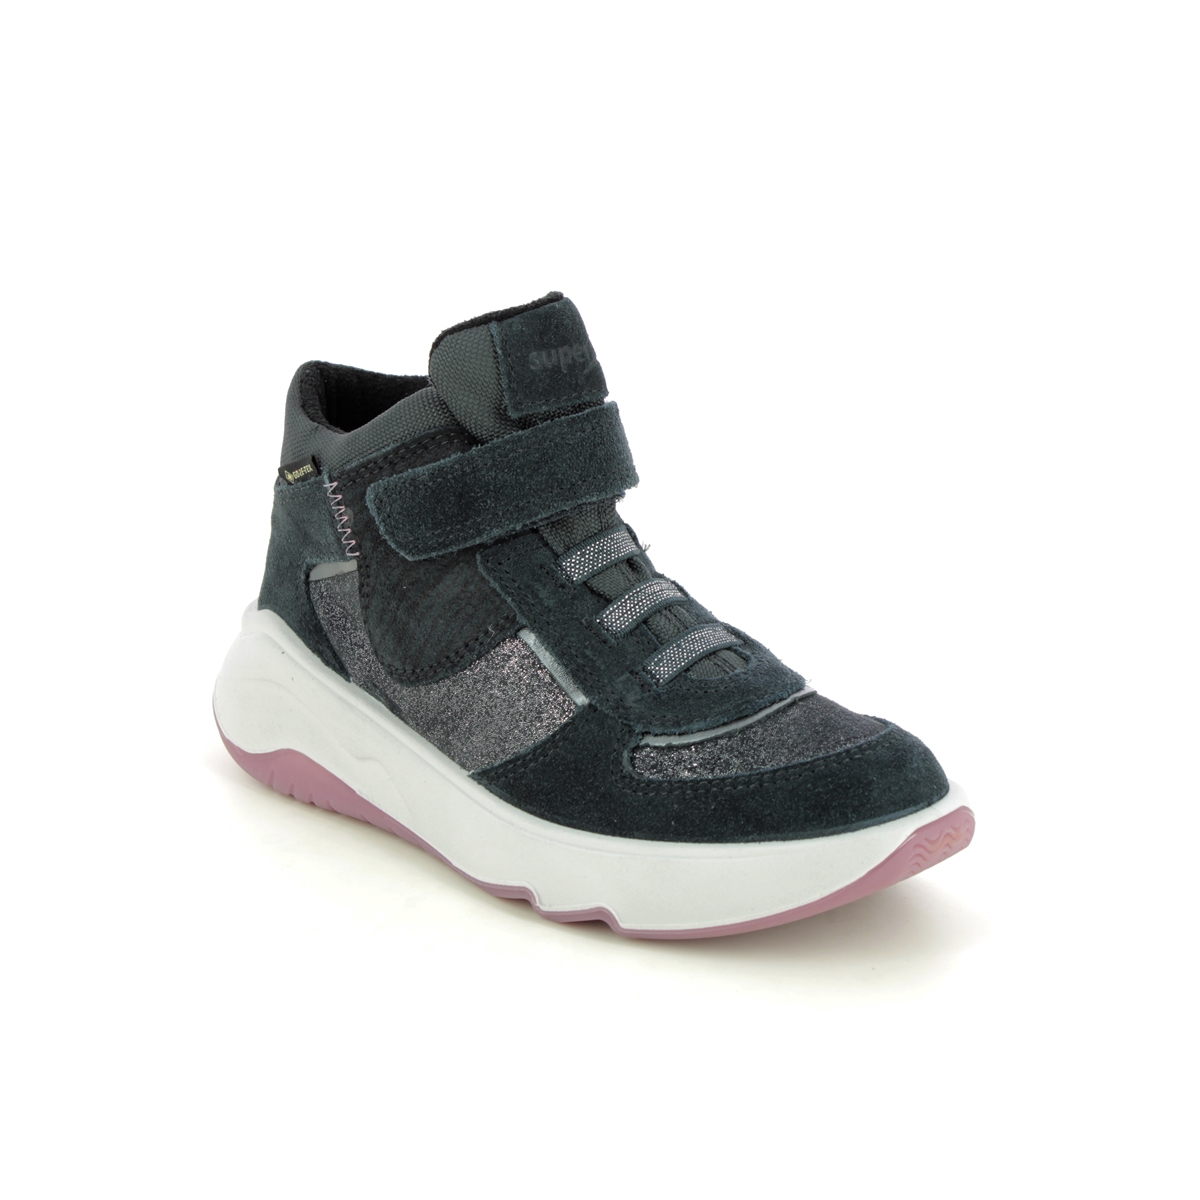 Superfit Melodie Ht Gtx Black Suede Kids Girls Trainers 1000632-2000 In Size 34 In Plain Black Suede For kids